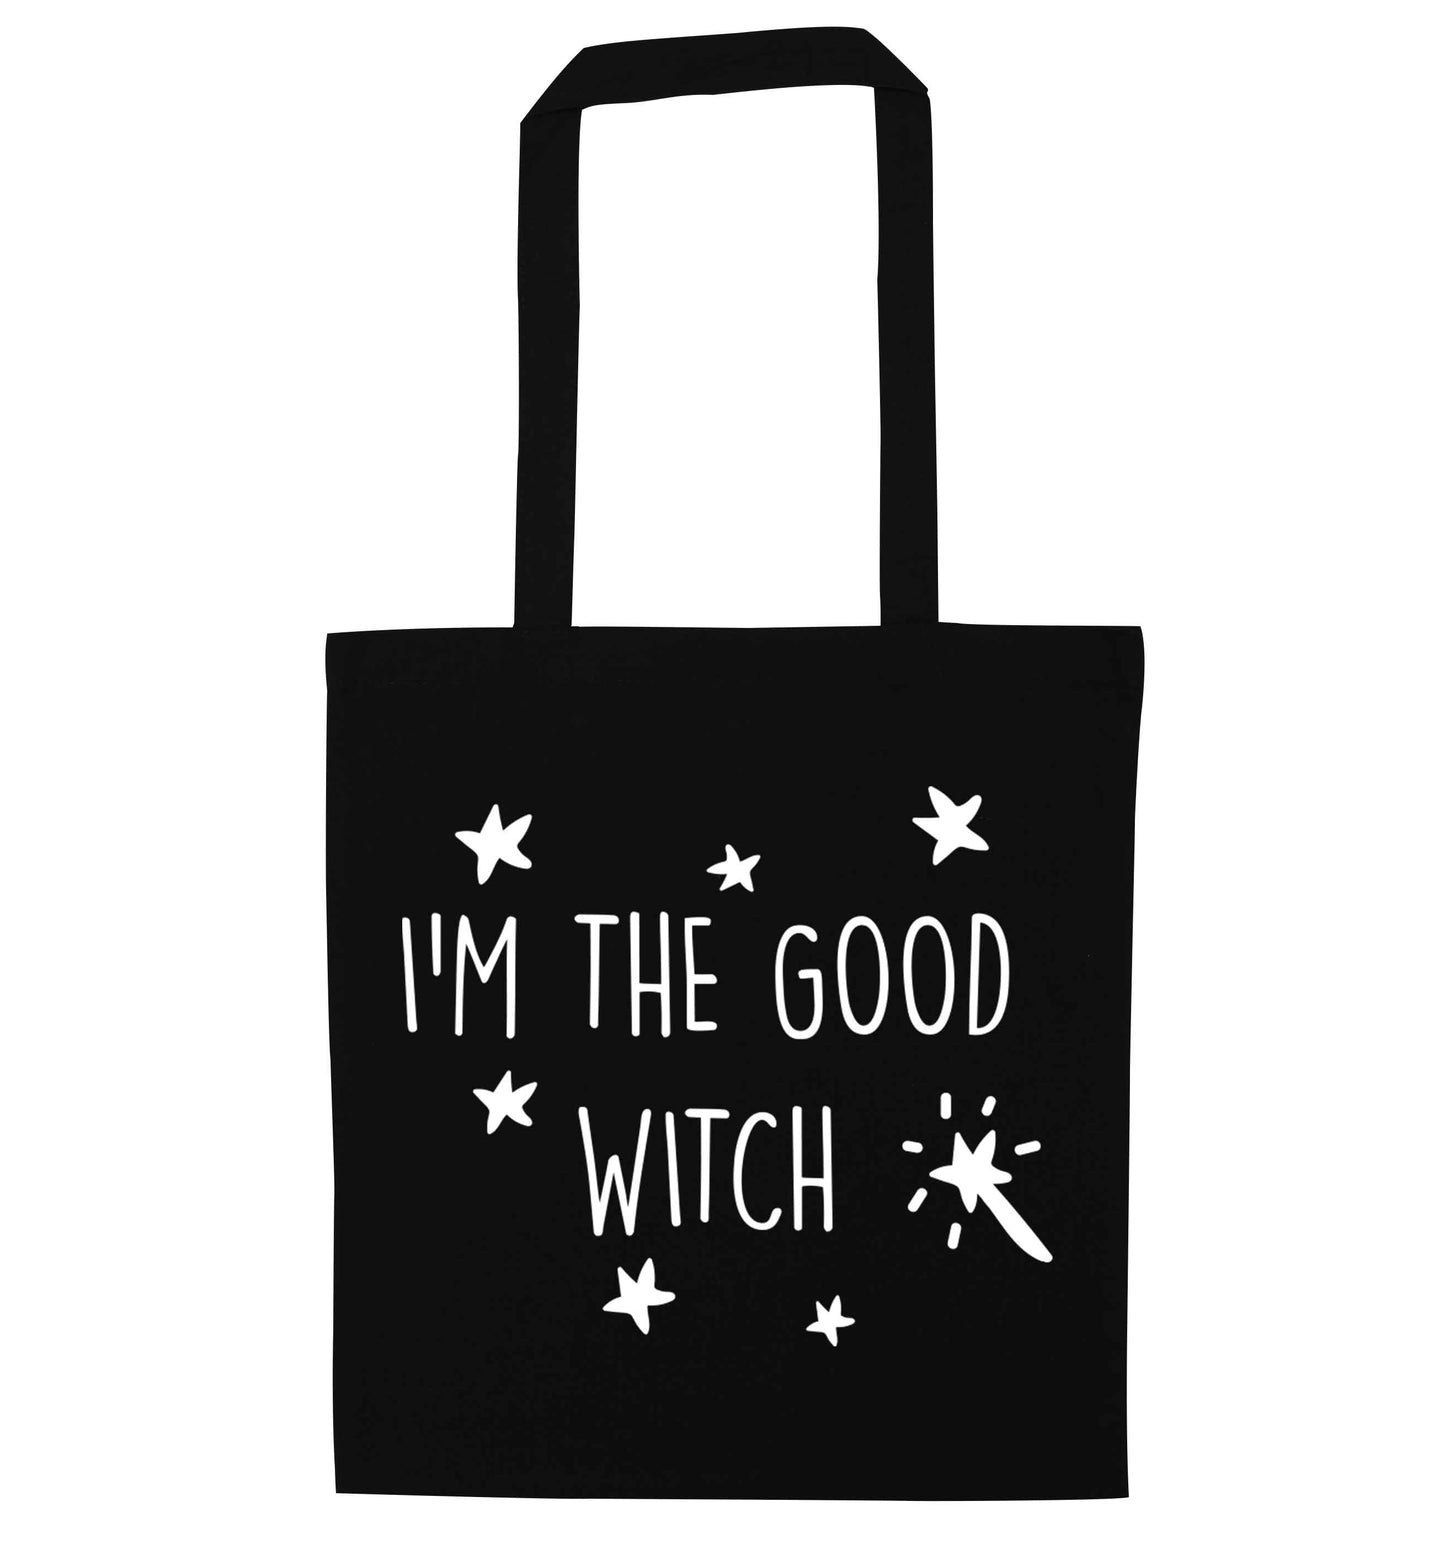 Good witch black tote bag